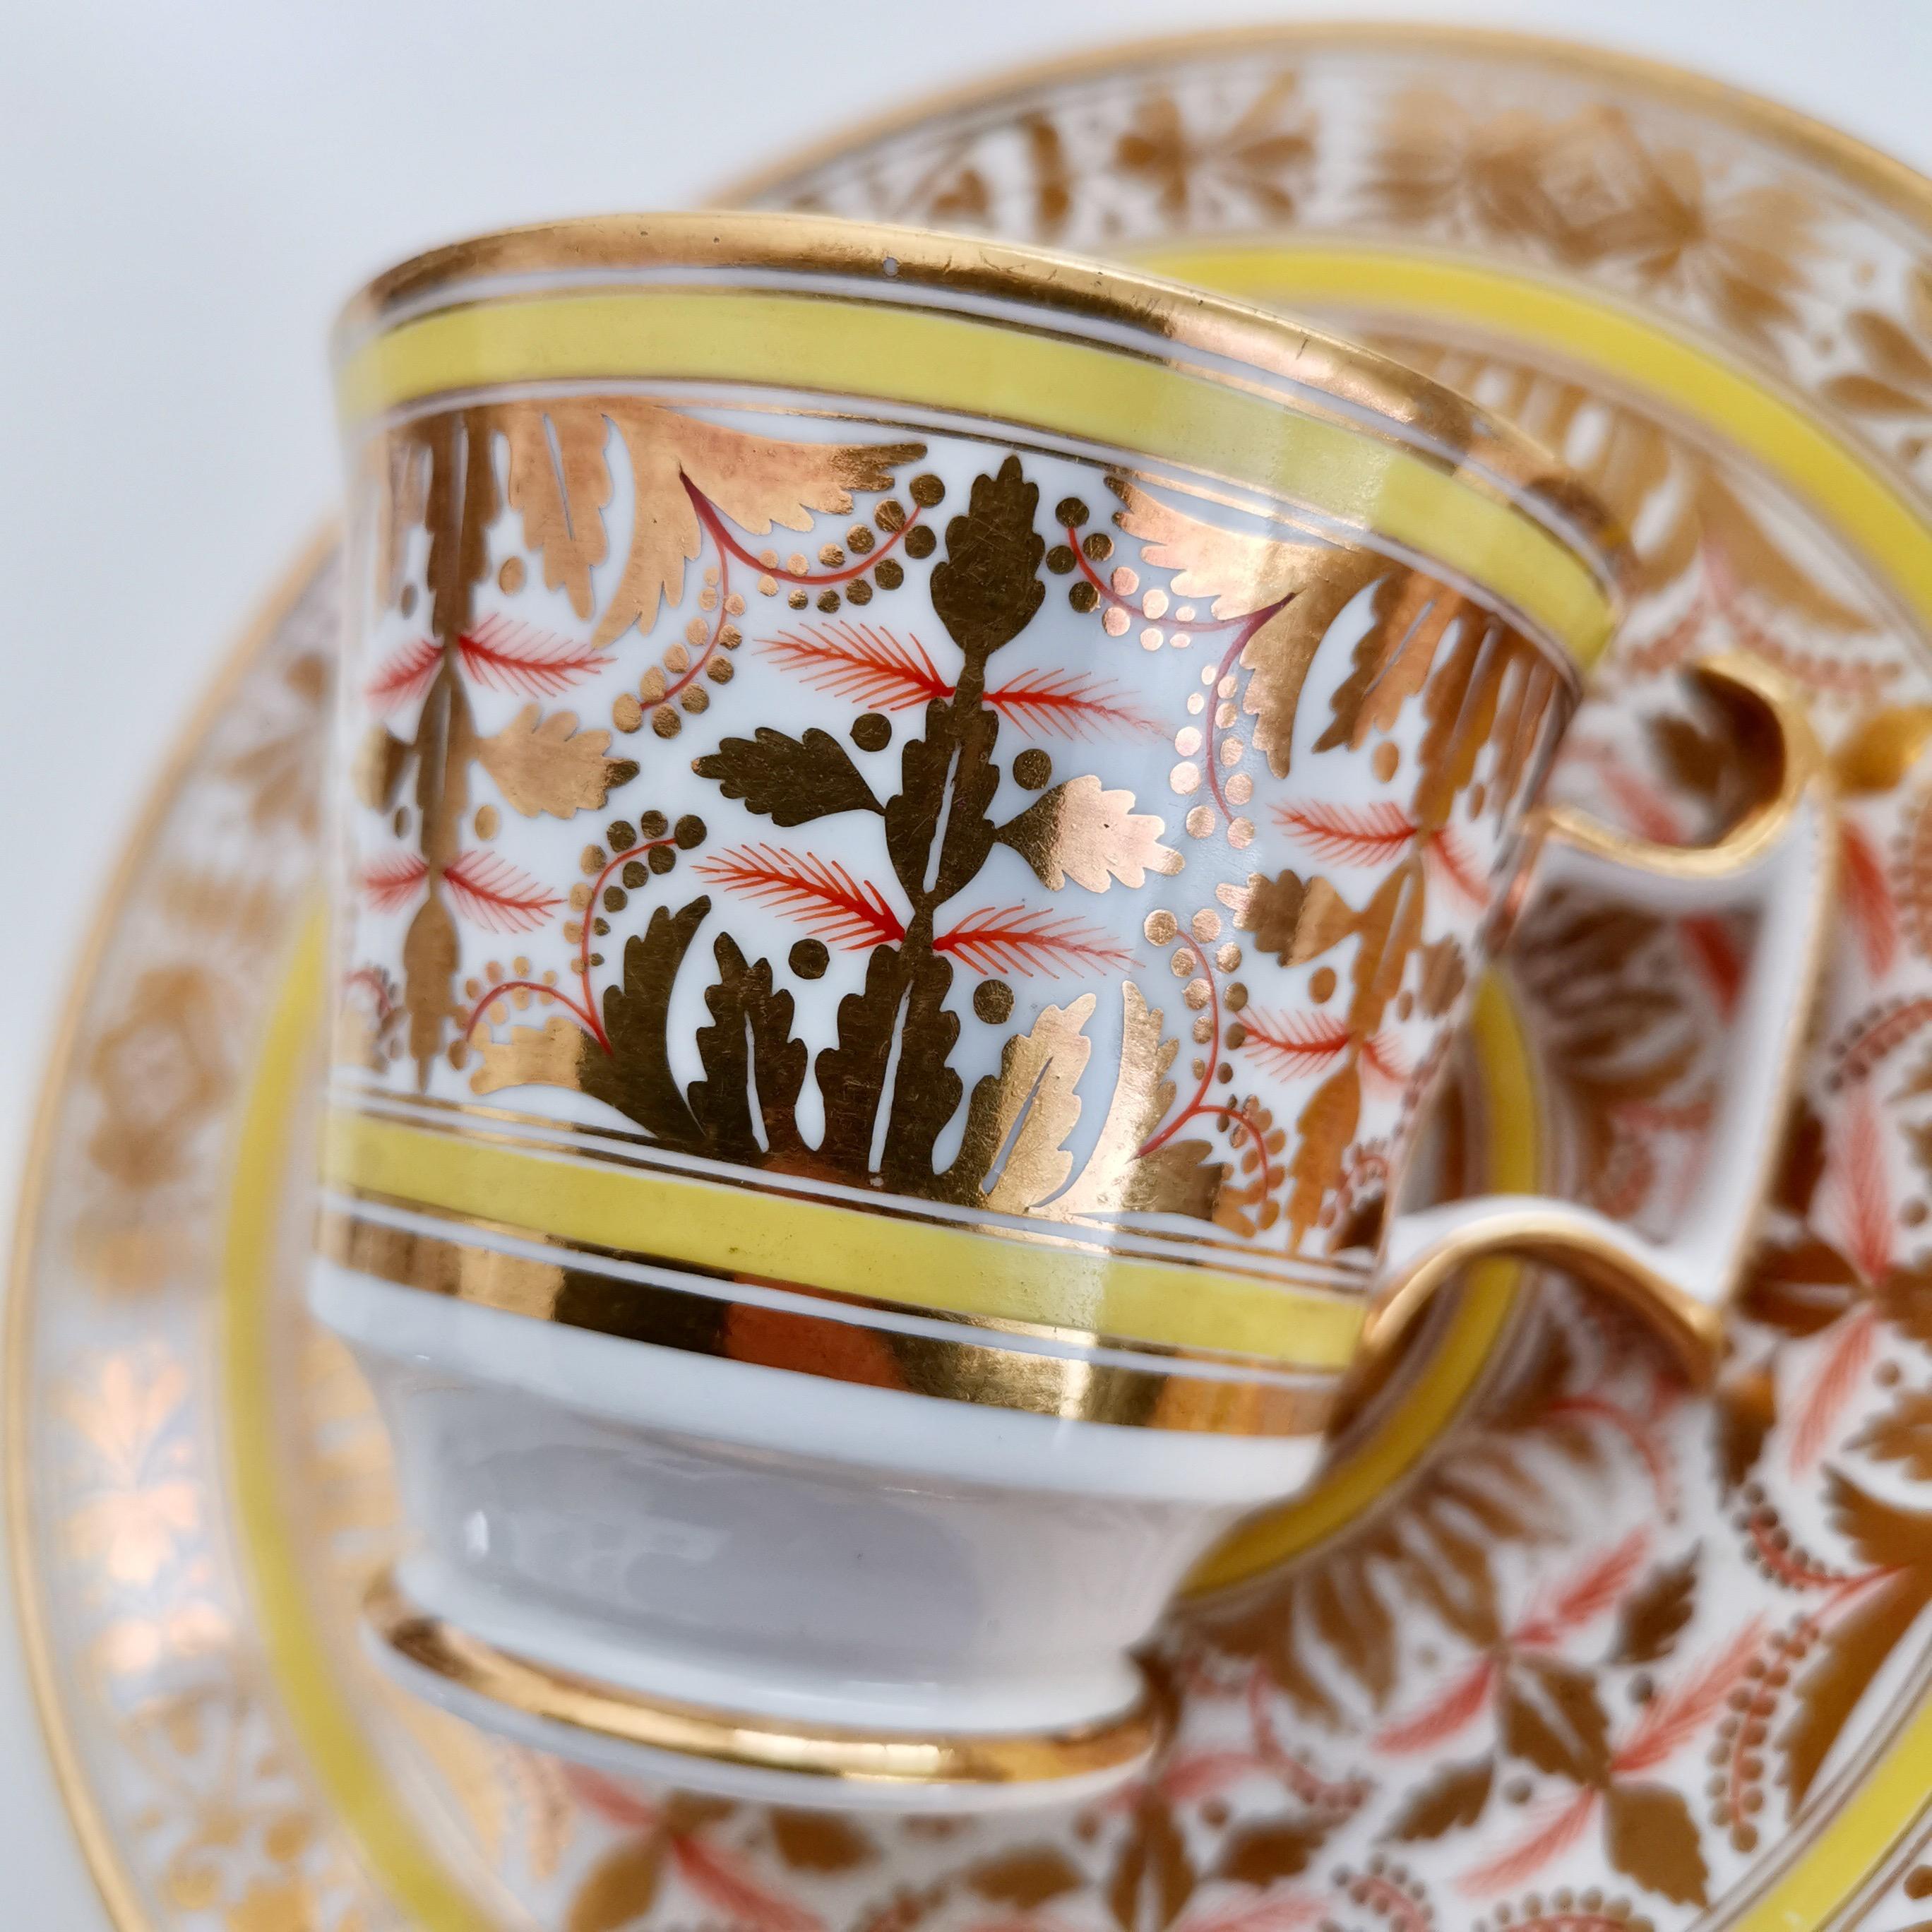 Spode Porcelain Teacup Set, Gilt, Yellow and Red Regency Pattern, circa 1815 7